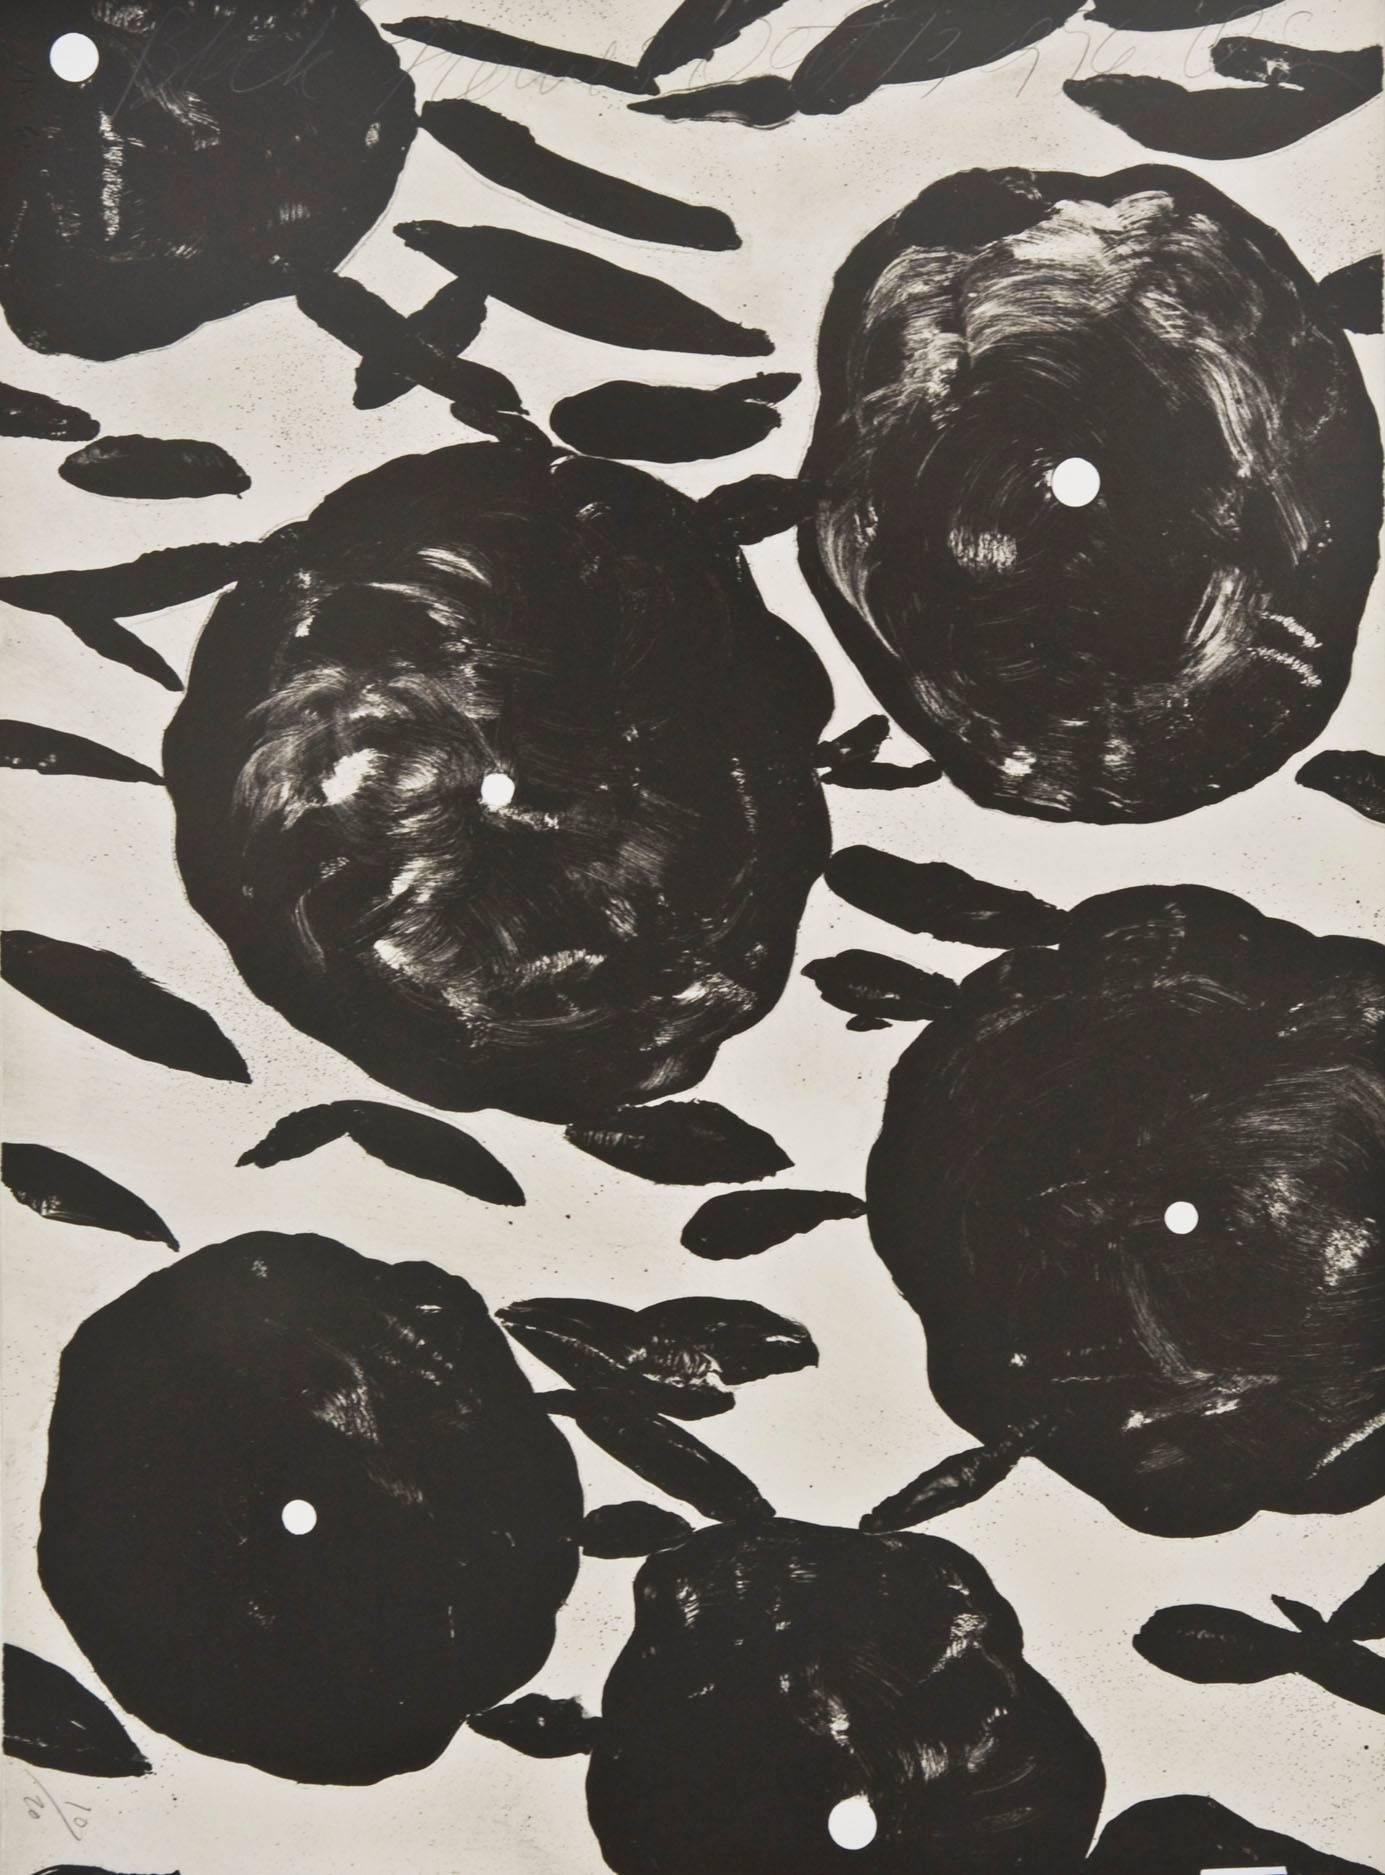 Black Flowers October 13, 1996 (10/20) - Print by Donald Sultan